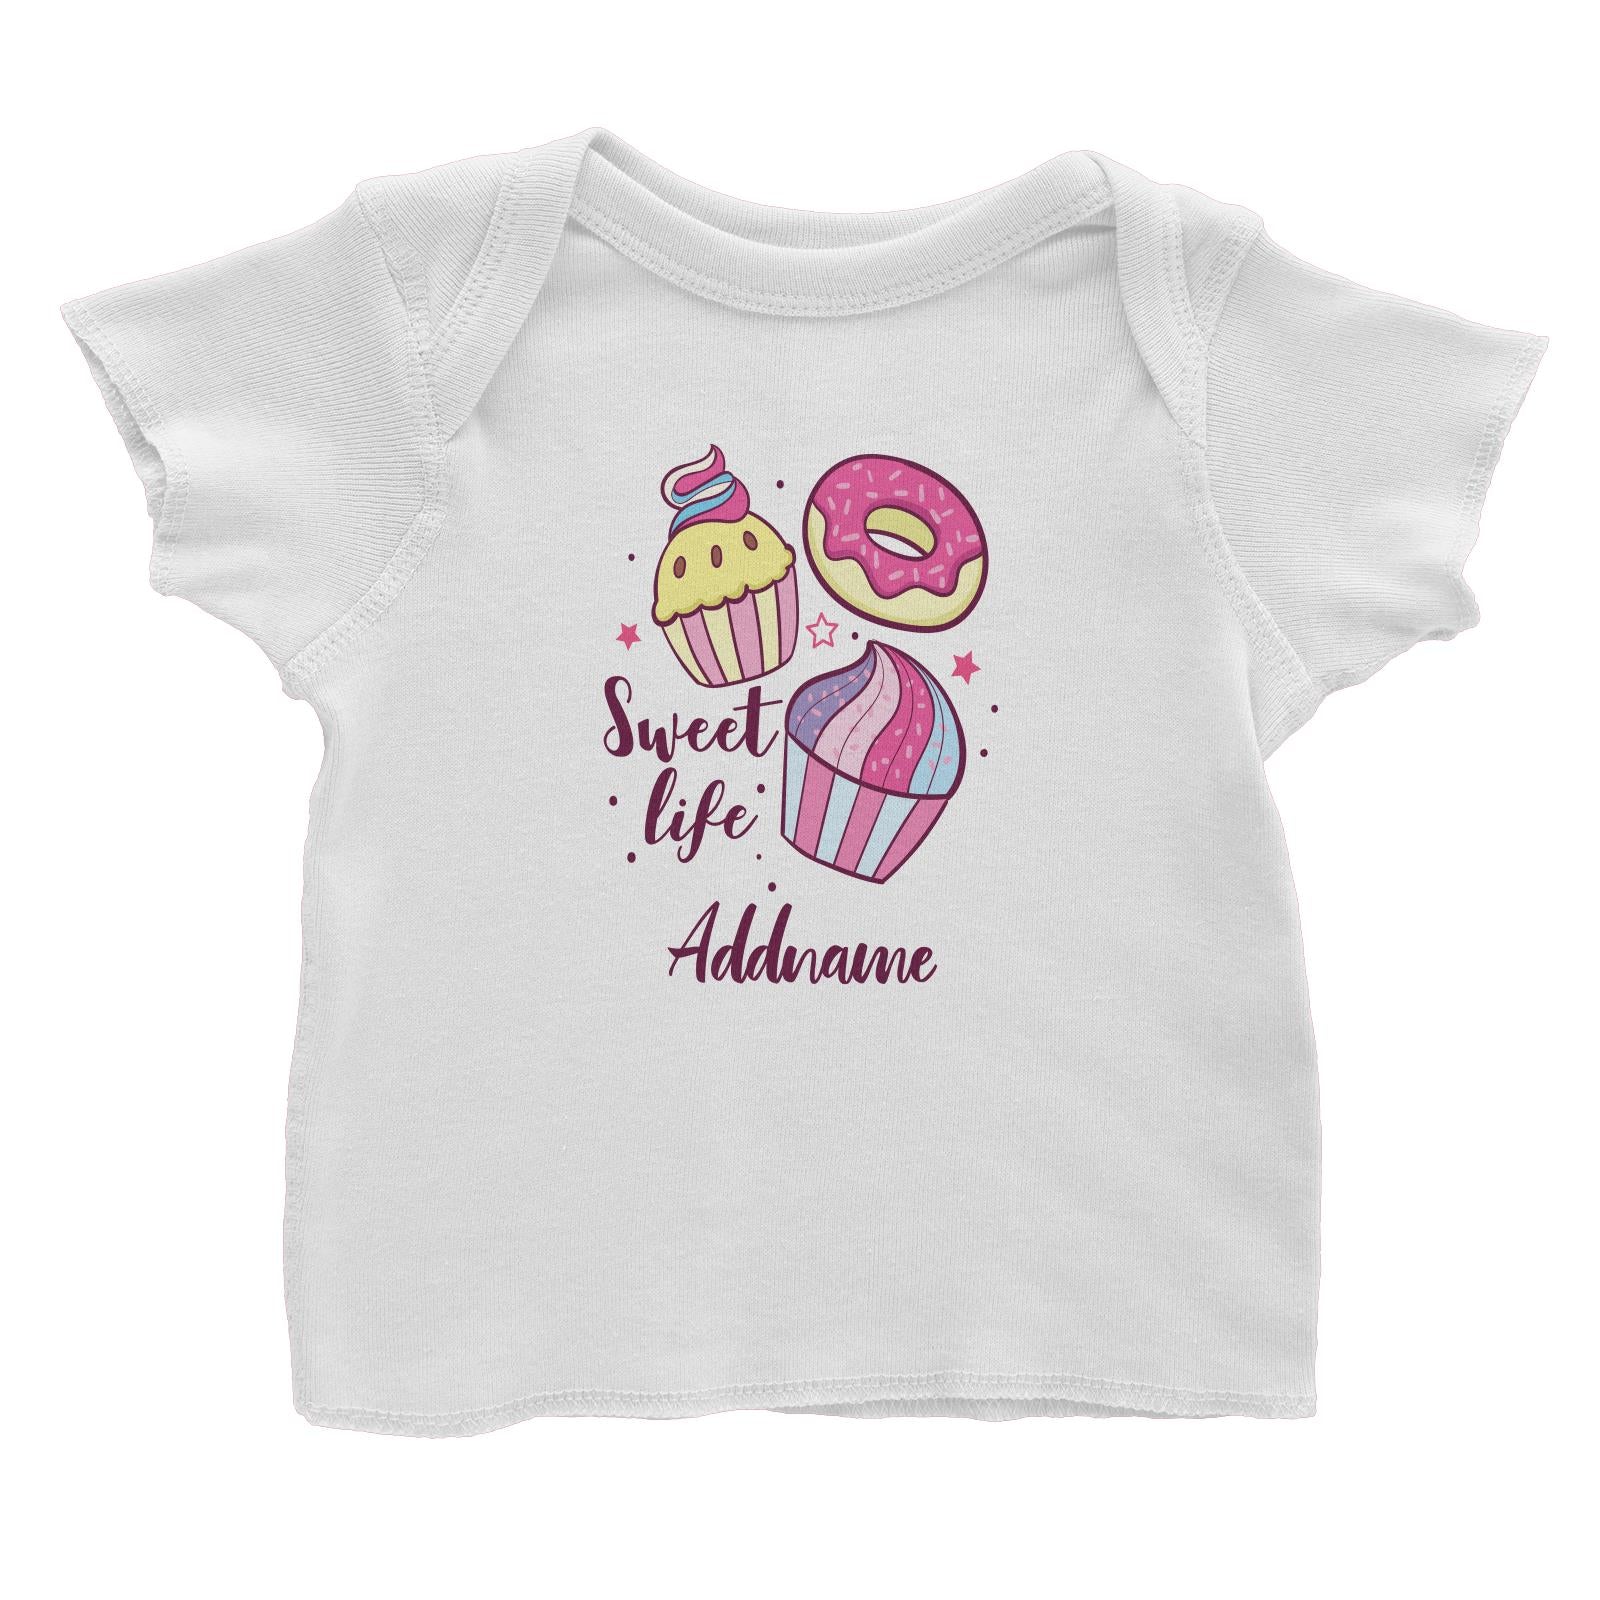 Cool Cute Foods Sweet Life Dessert Addname Baby T-Shirt